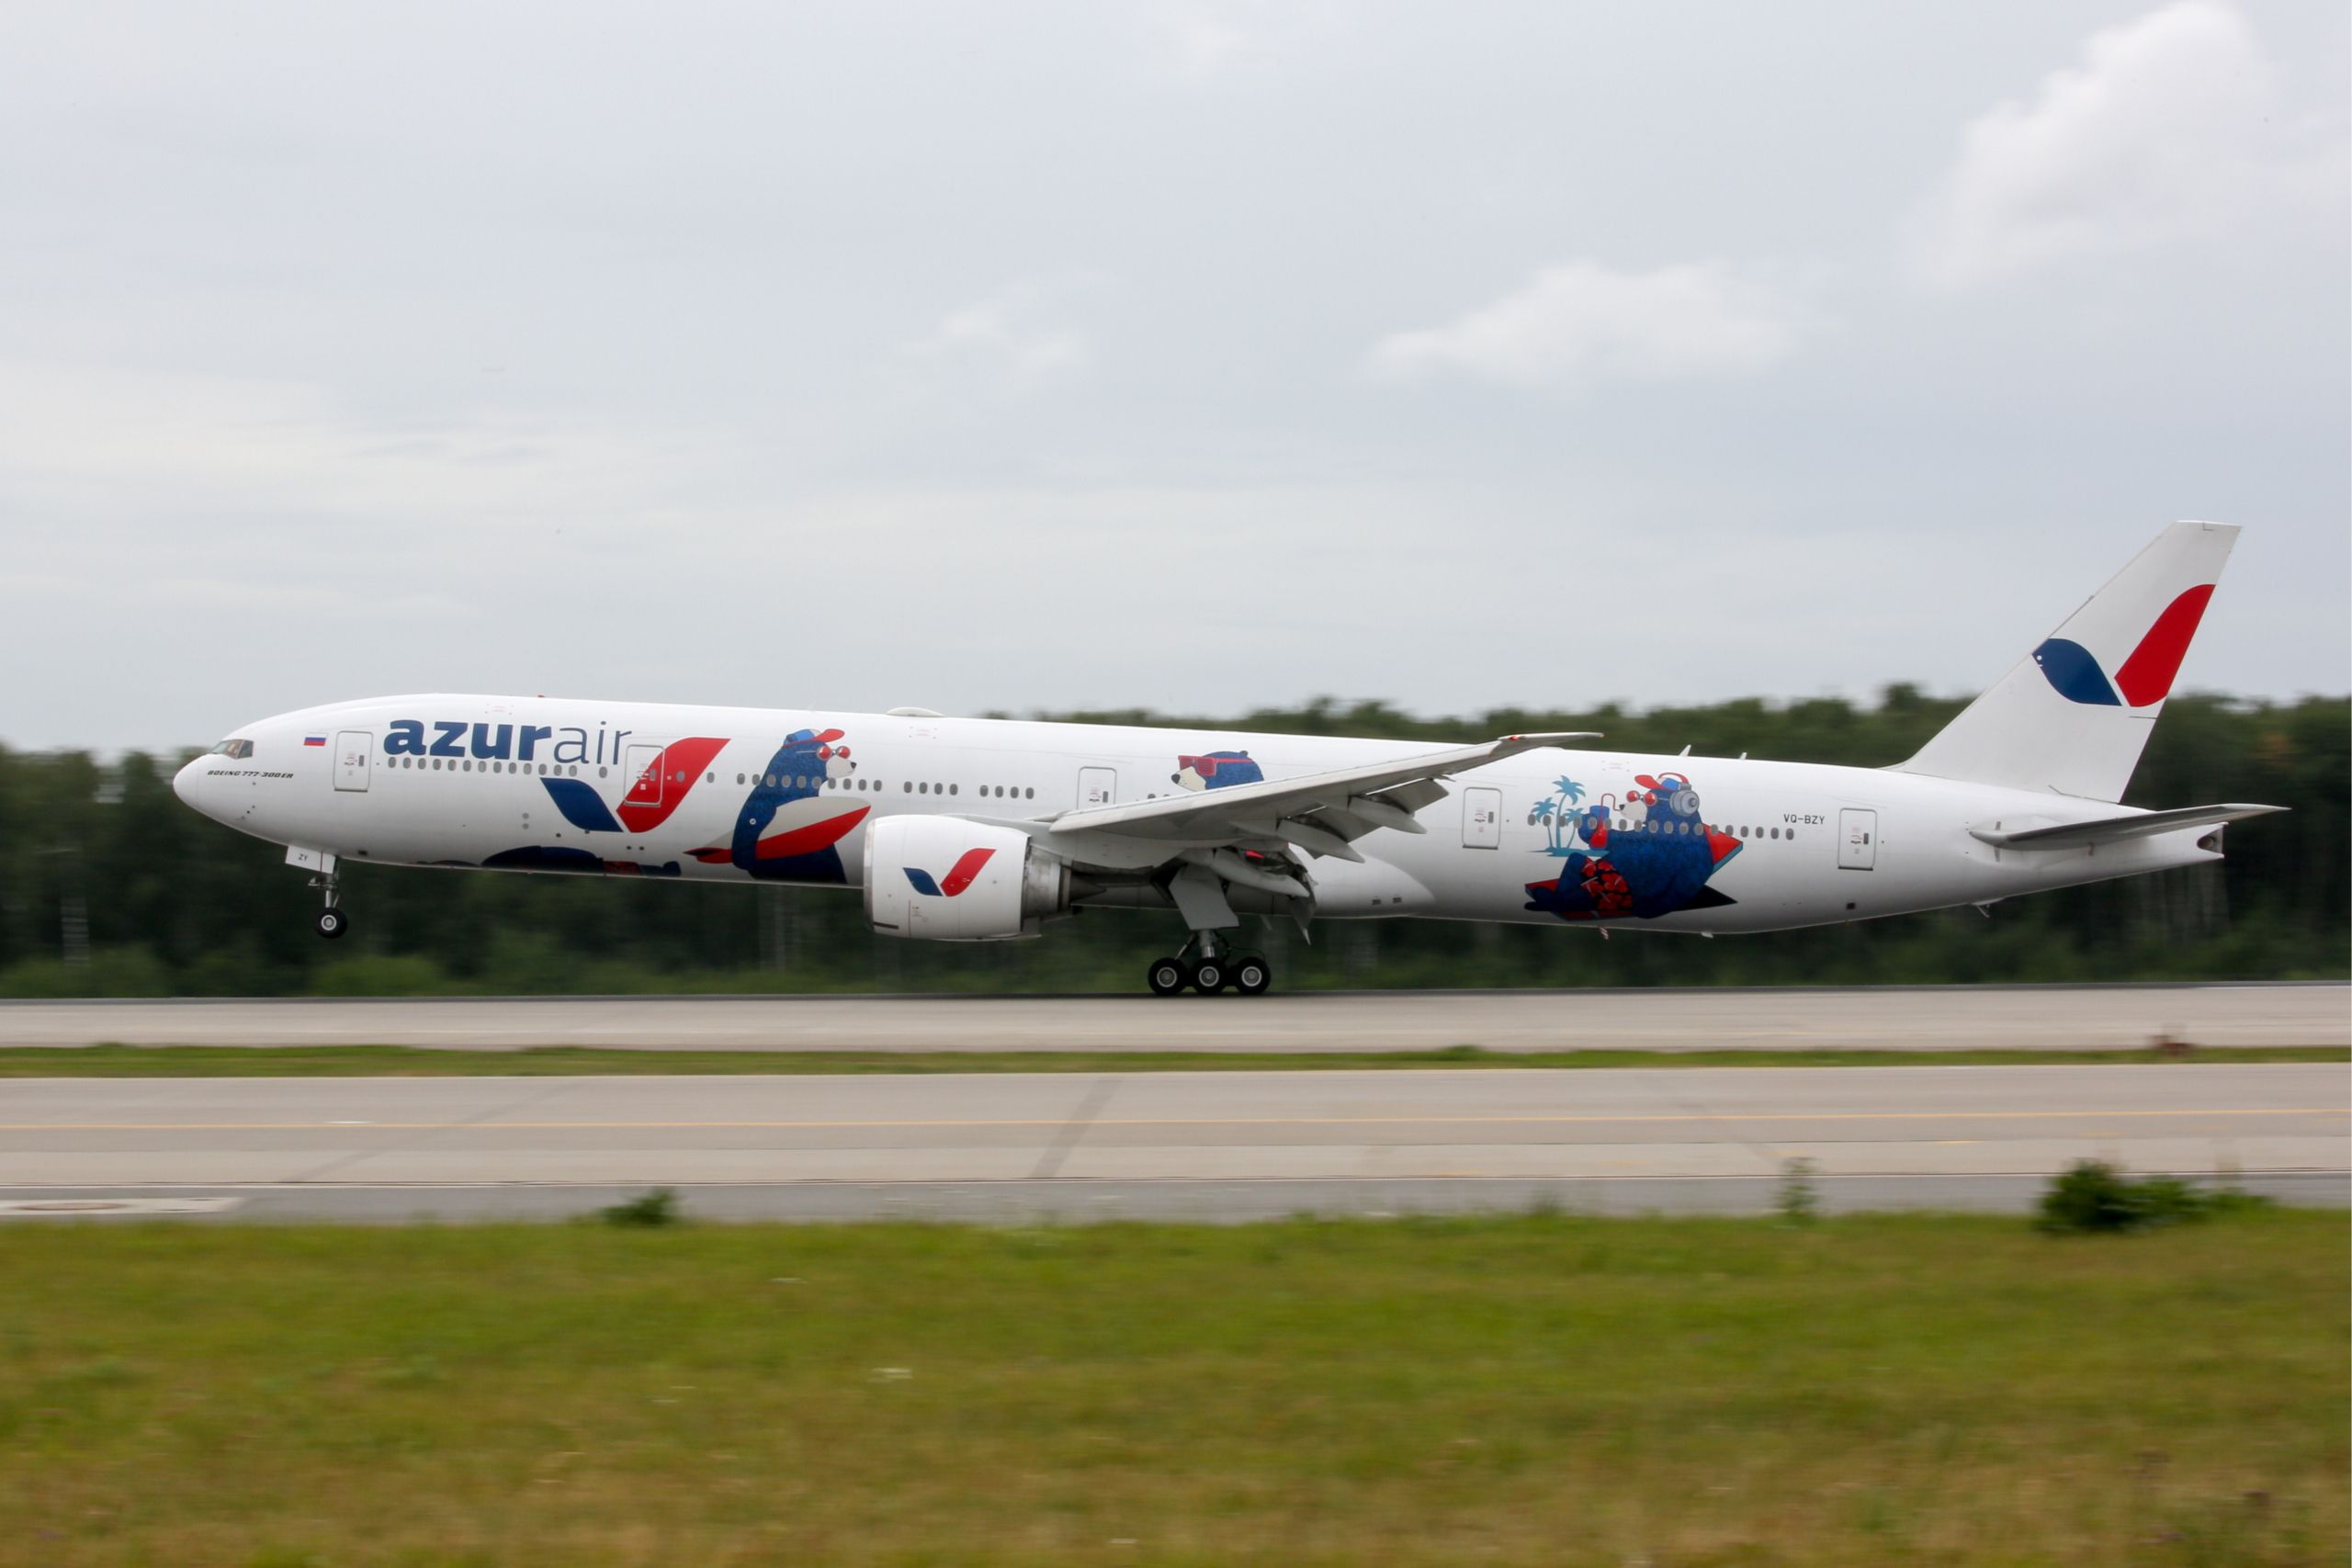 Azur Air puts Boeing 777 jet airliner into service